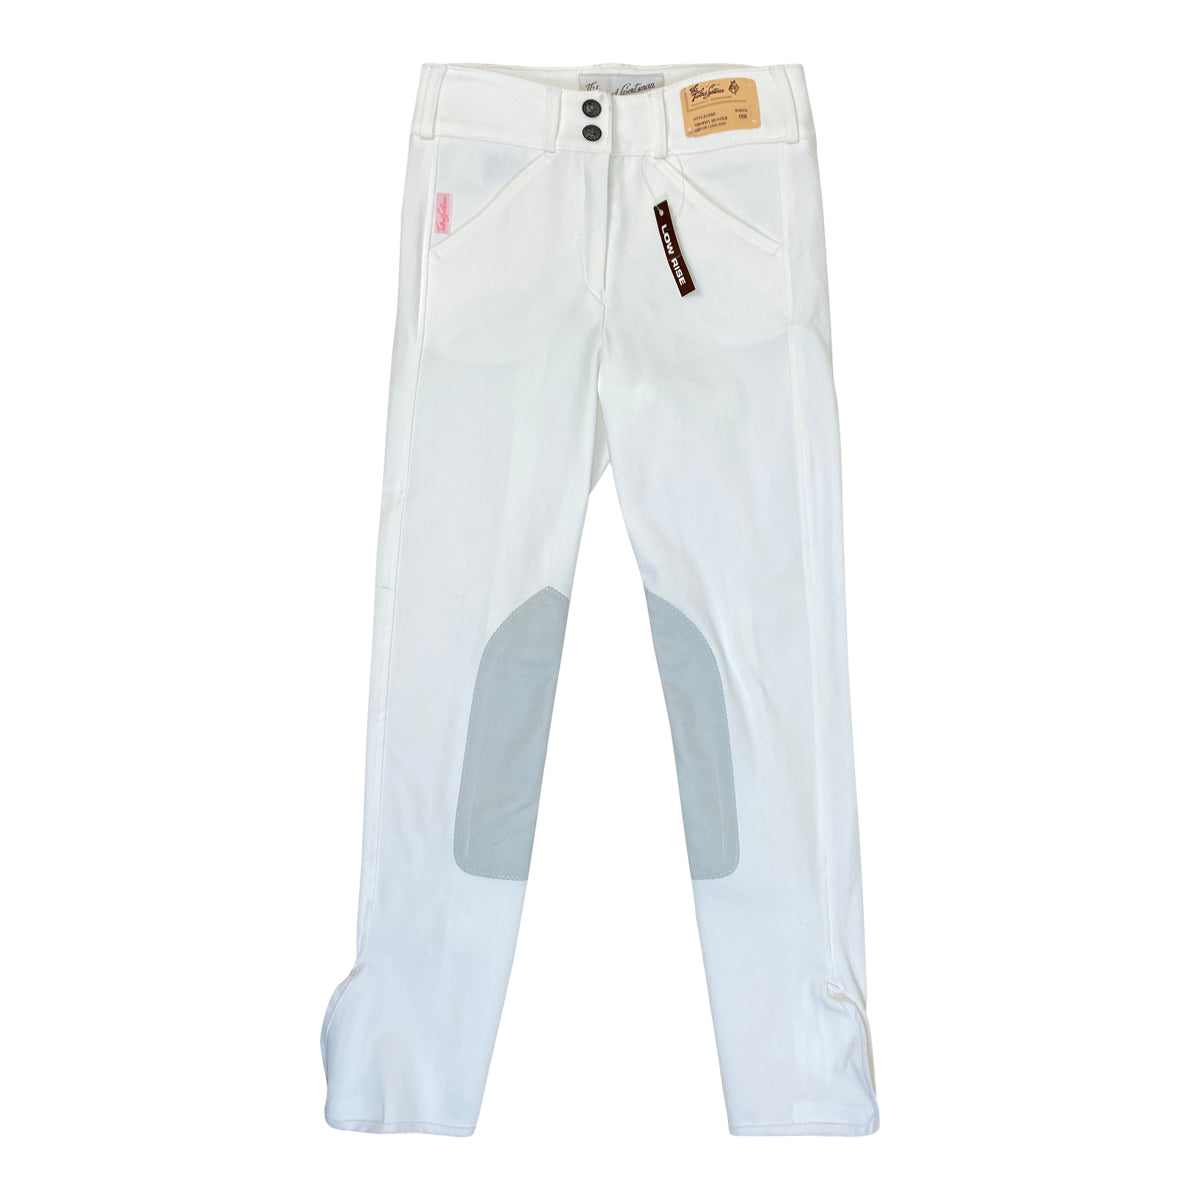 Tailored Sportsman Trophy Hunter Breeches in White